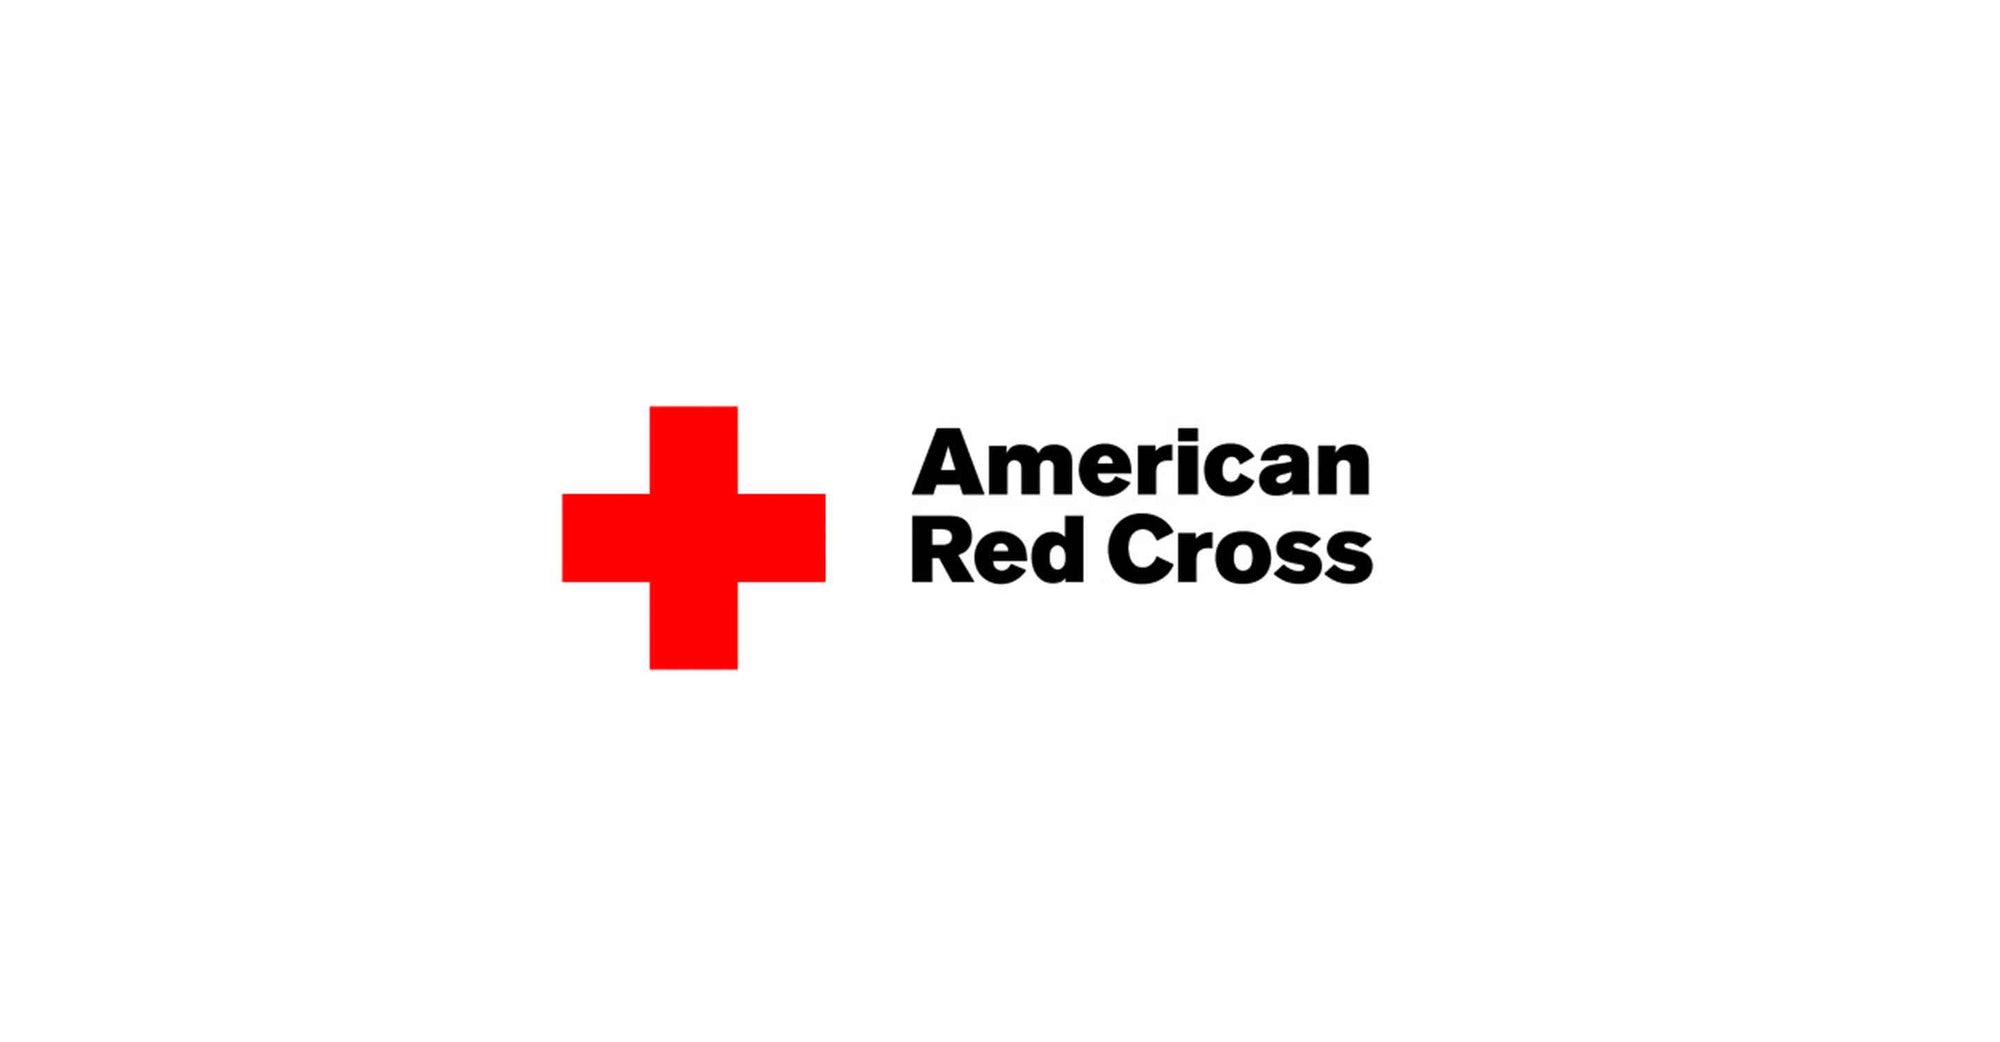 IQAir works with the American Red Cross during the Southern California wildfires